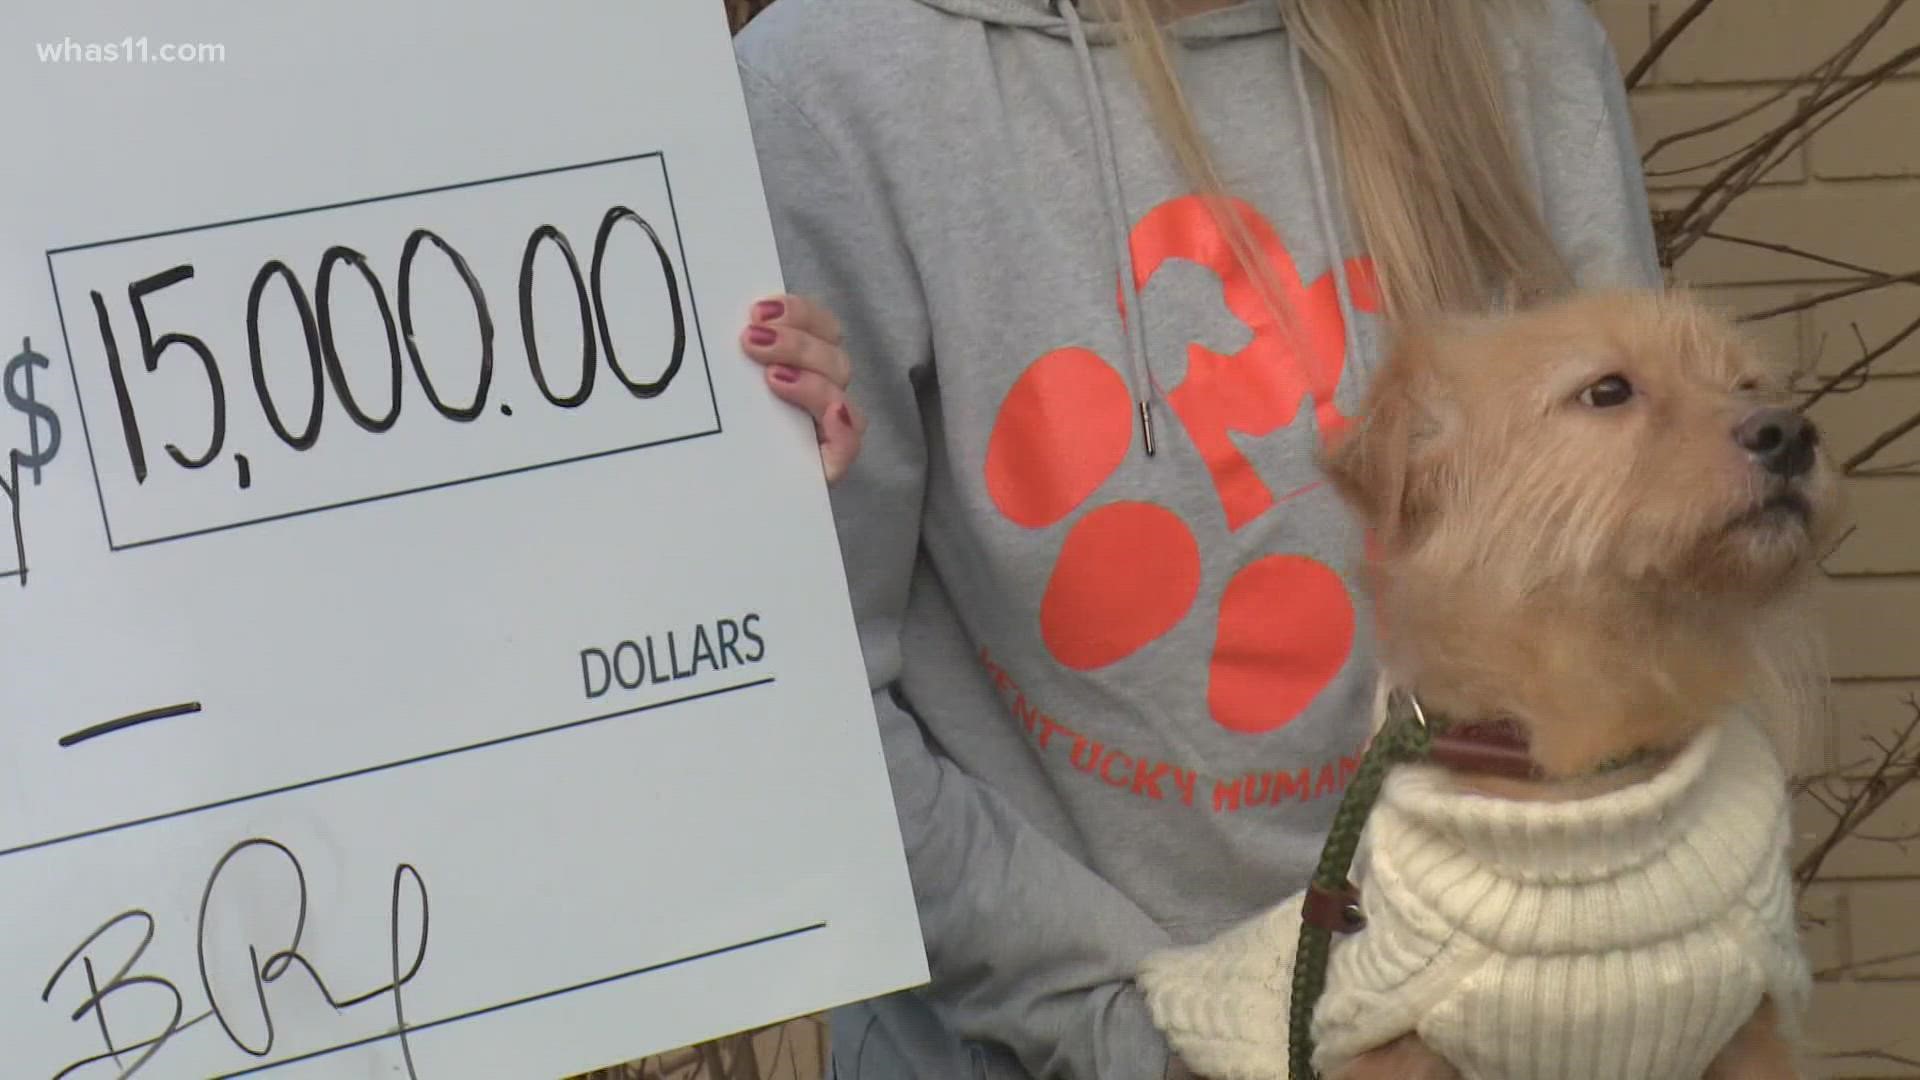 That money will help the Kentucky Humane Society give dogs and cats the care they need.